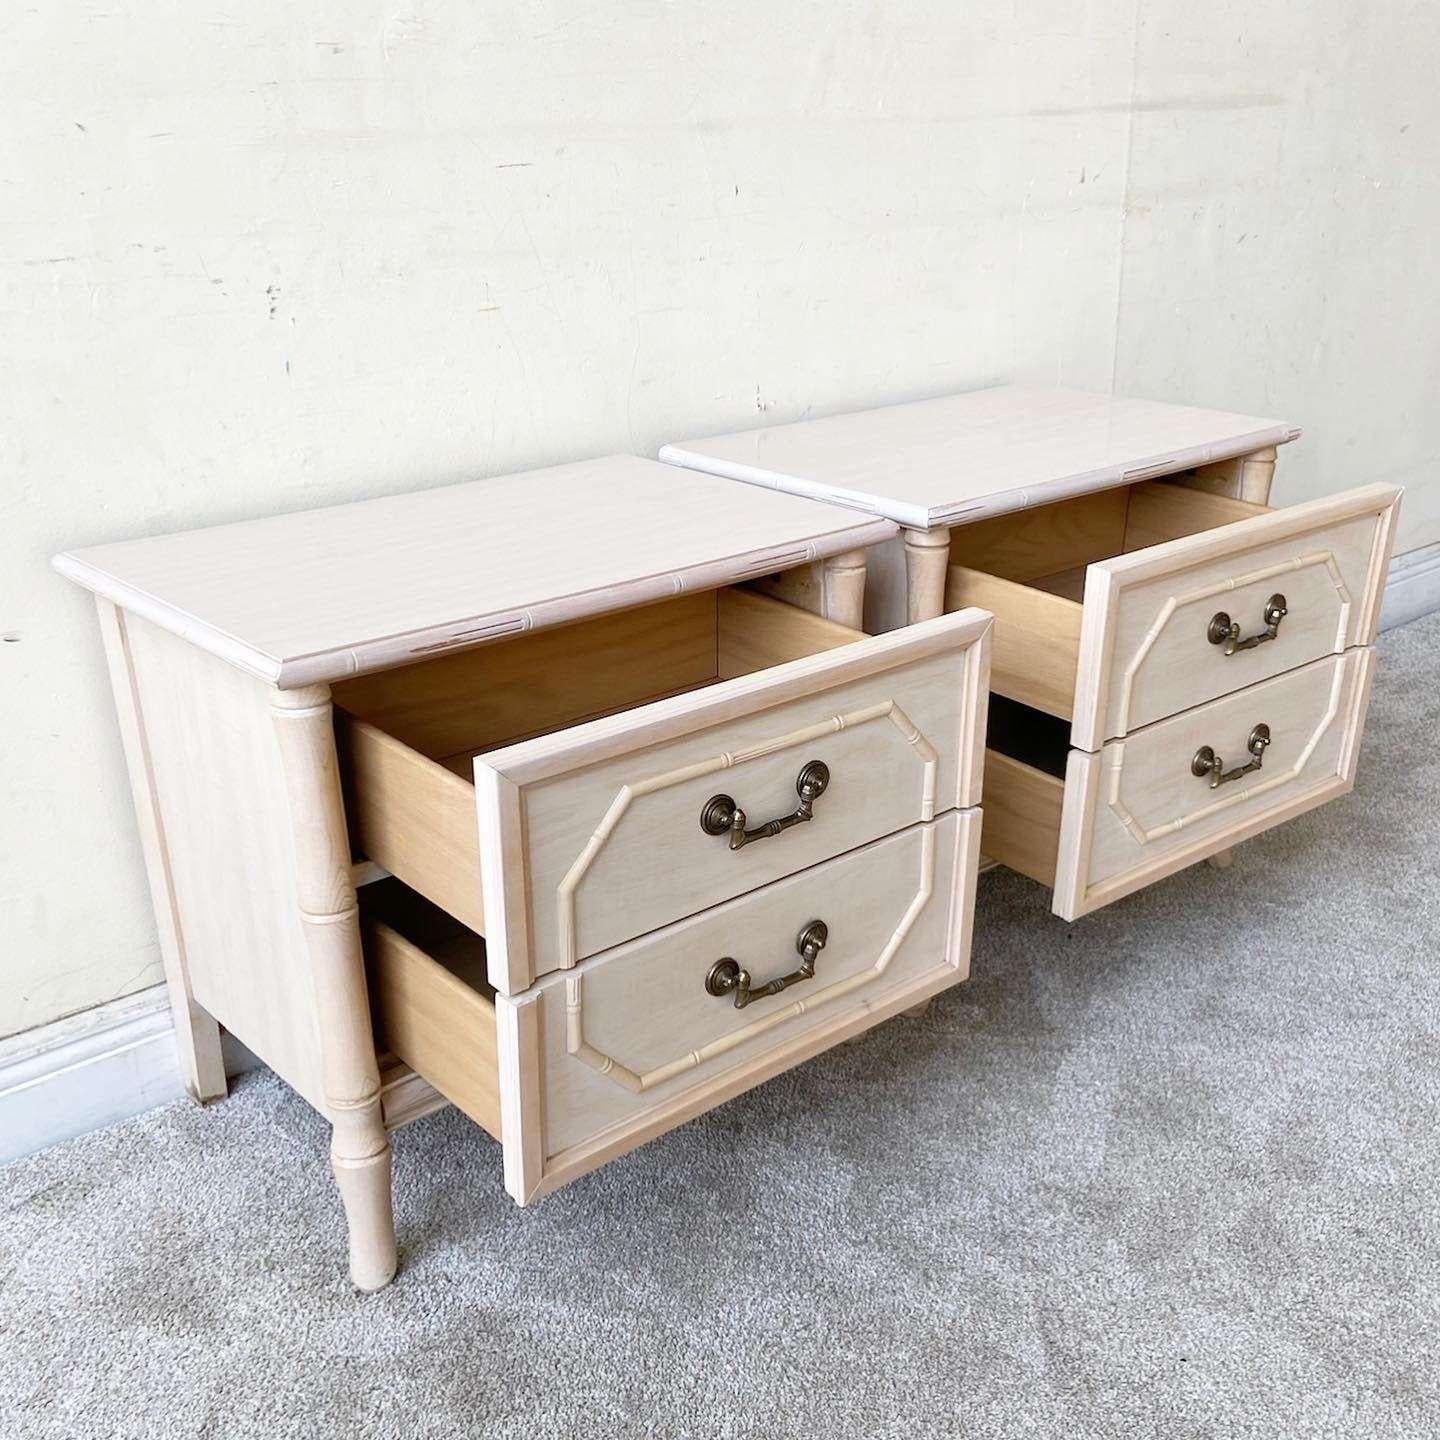 Amazing pair of vintage bohemian nightstands by Broyhill. Each feature a fantastic faux bamboo frame with a washed finish and 2 spacious drawers.